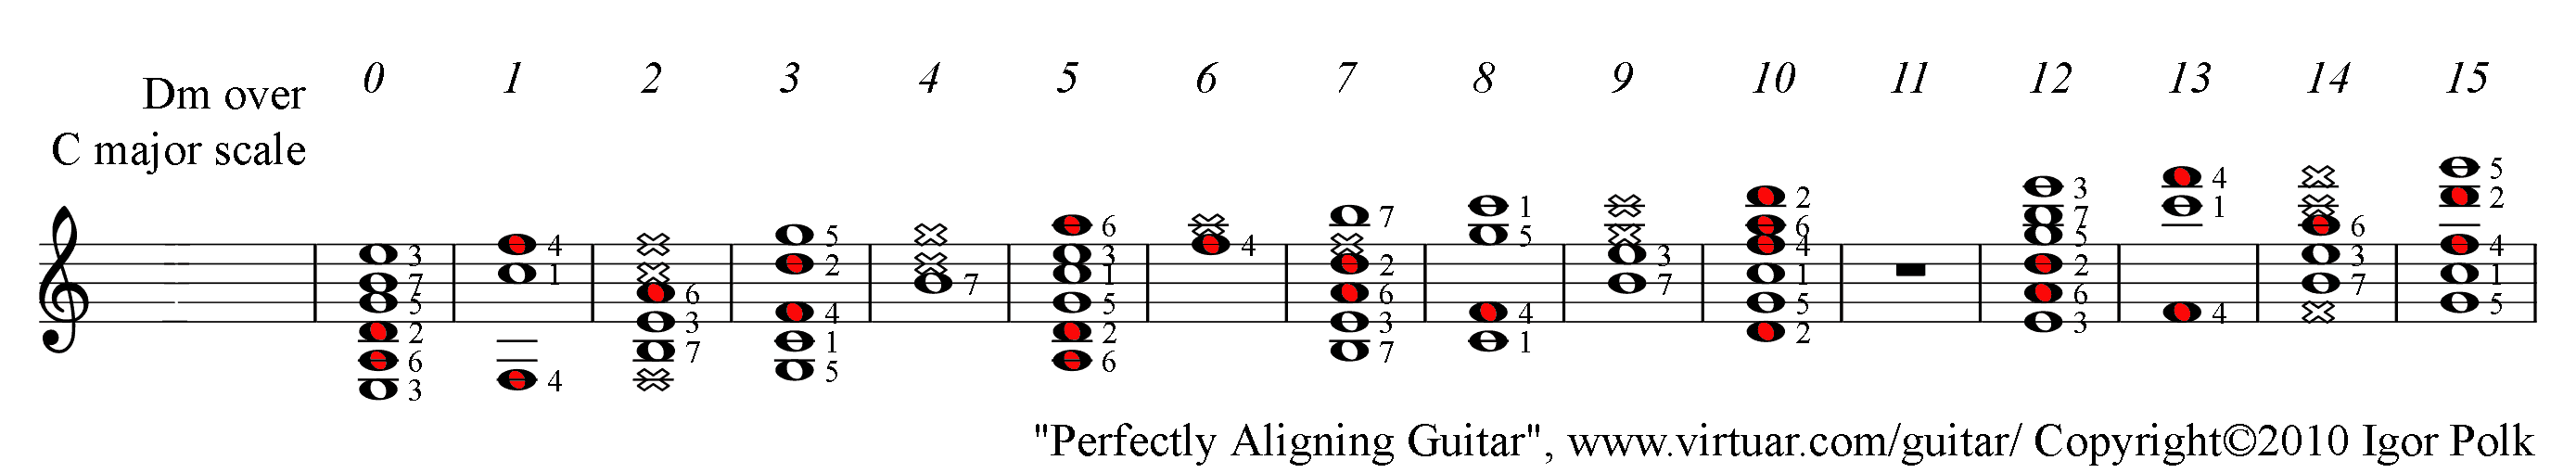 D minor chord over C major scale, guitar PAD